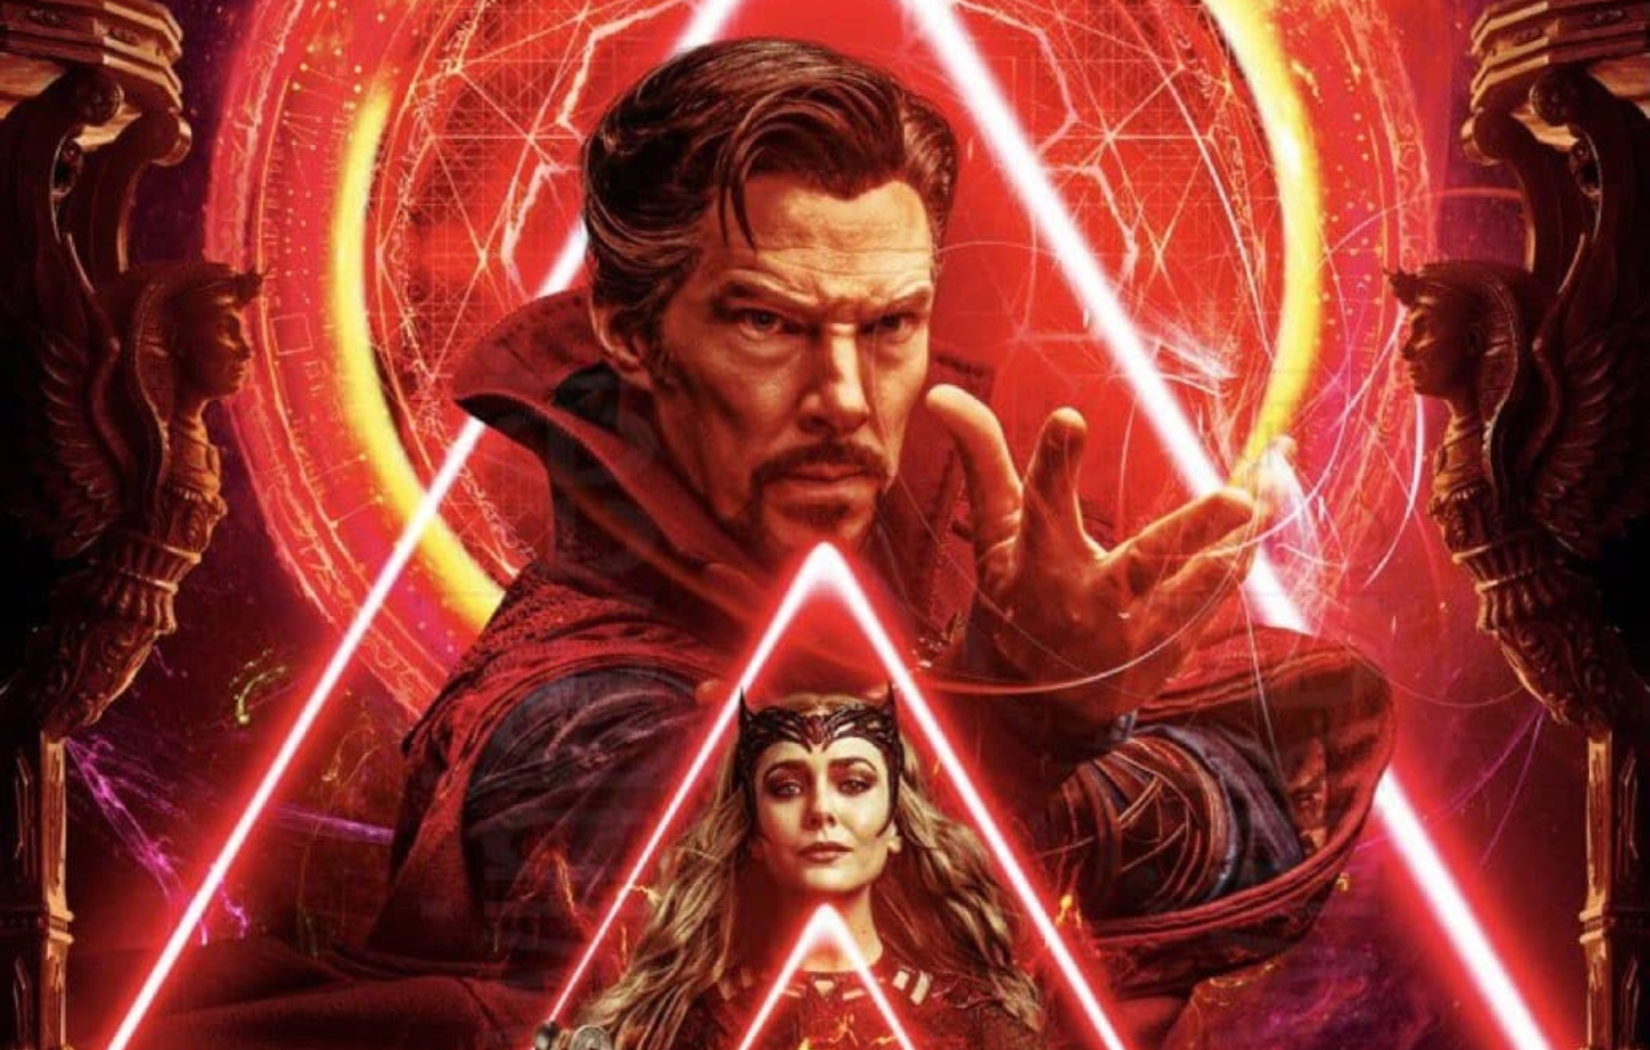 1650x1050 Doctor Strange in the Multiverse of Madness 2022 Movie Poster